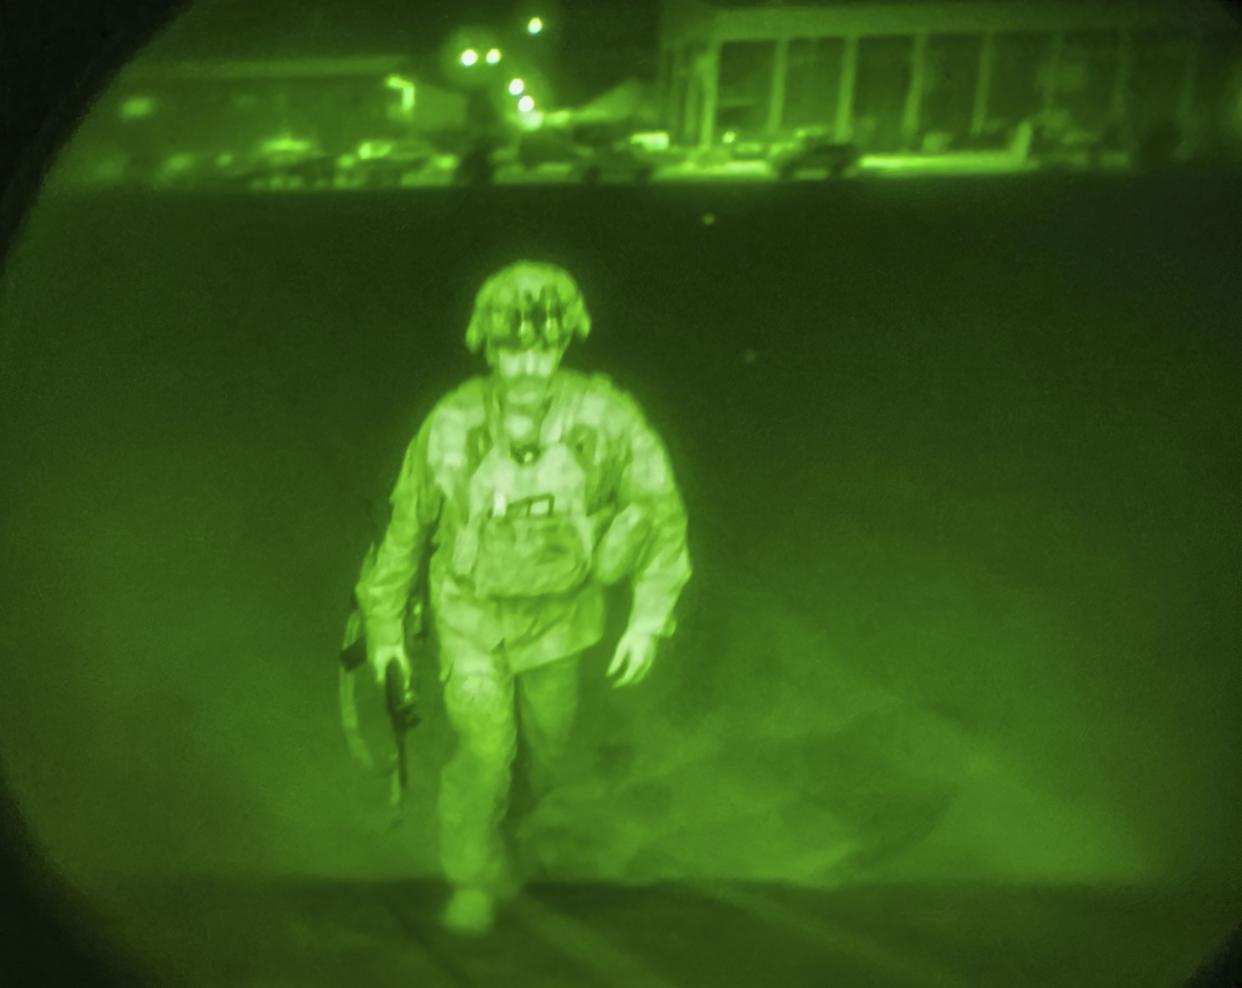 In this image made through a night vision scope and provided by U.S. Central Command, Maj. Gen. Chris Donahue, commander of the U.S. Army 82nd Airborne Division, XVIII Airborne Corps, boards a C-17 cargo plane at the Hamid Karzai International Airport in Kabul, Afghanistan, Monday, Aug. 30, as the final American service member to depart Afghanistan. 